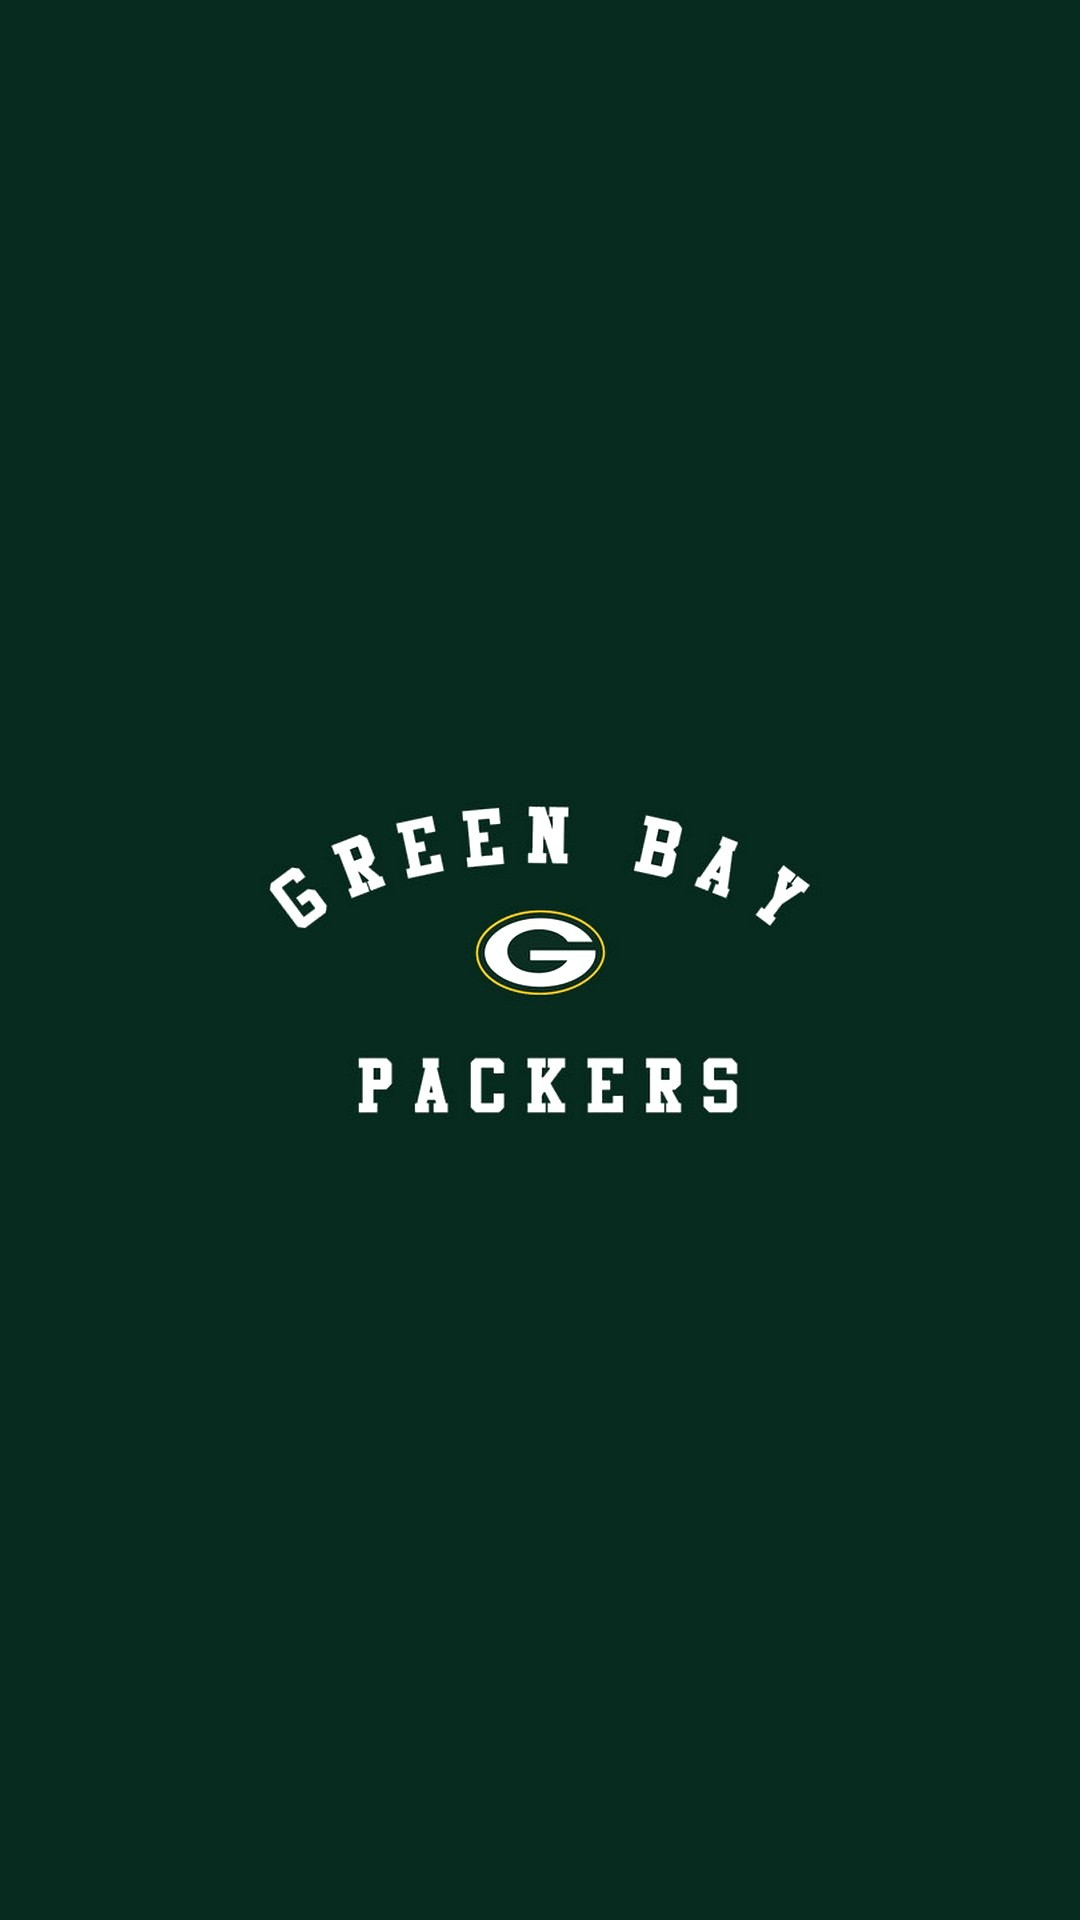 Mobile Wallpaper HD Green Bay Packers with high-resolution 1080x1920 pixel. You can use and set as wallpaper for Notebook Screensavers, Mac Wallpapers, Mobile Home Screen, iPhone or Android Phones Lock Screen